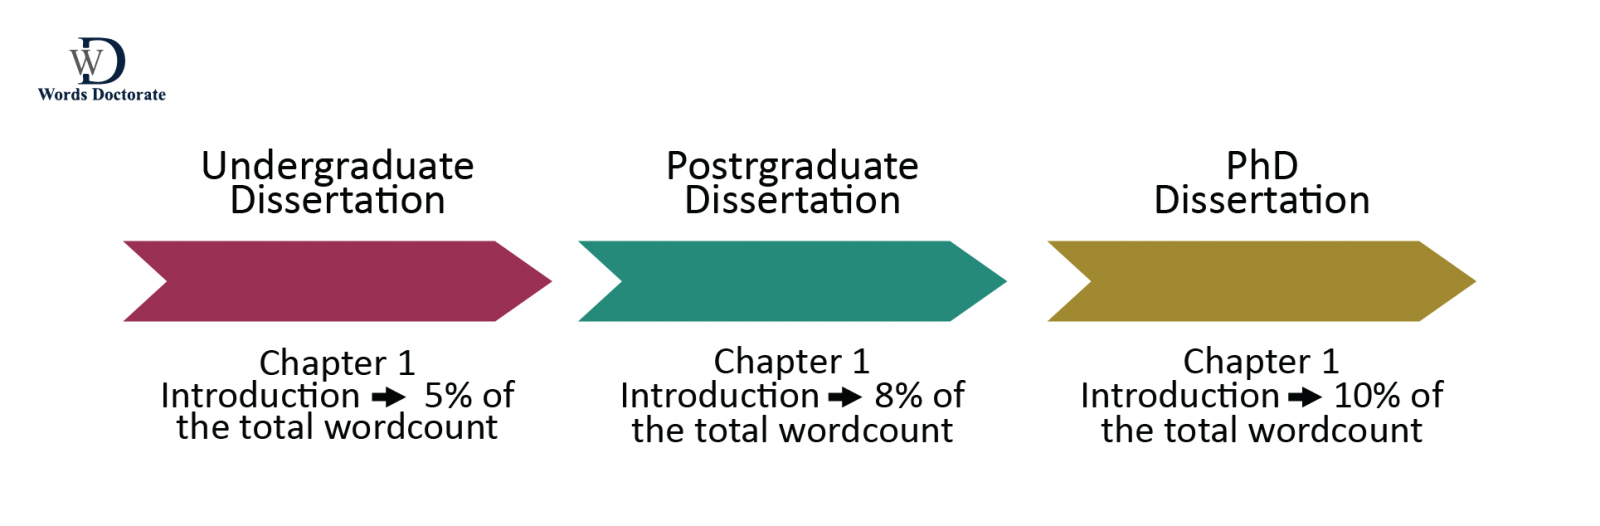 Format for Dissertation writing Introduction - Words Doctorate